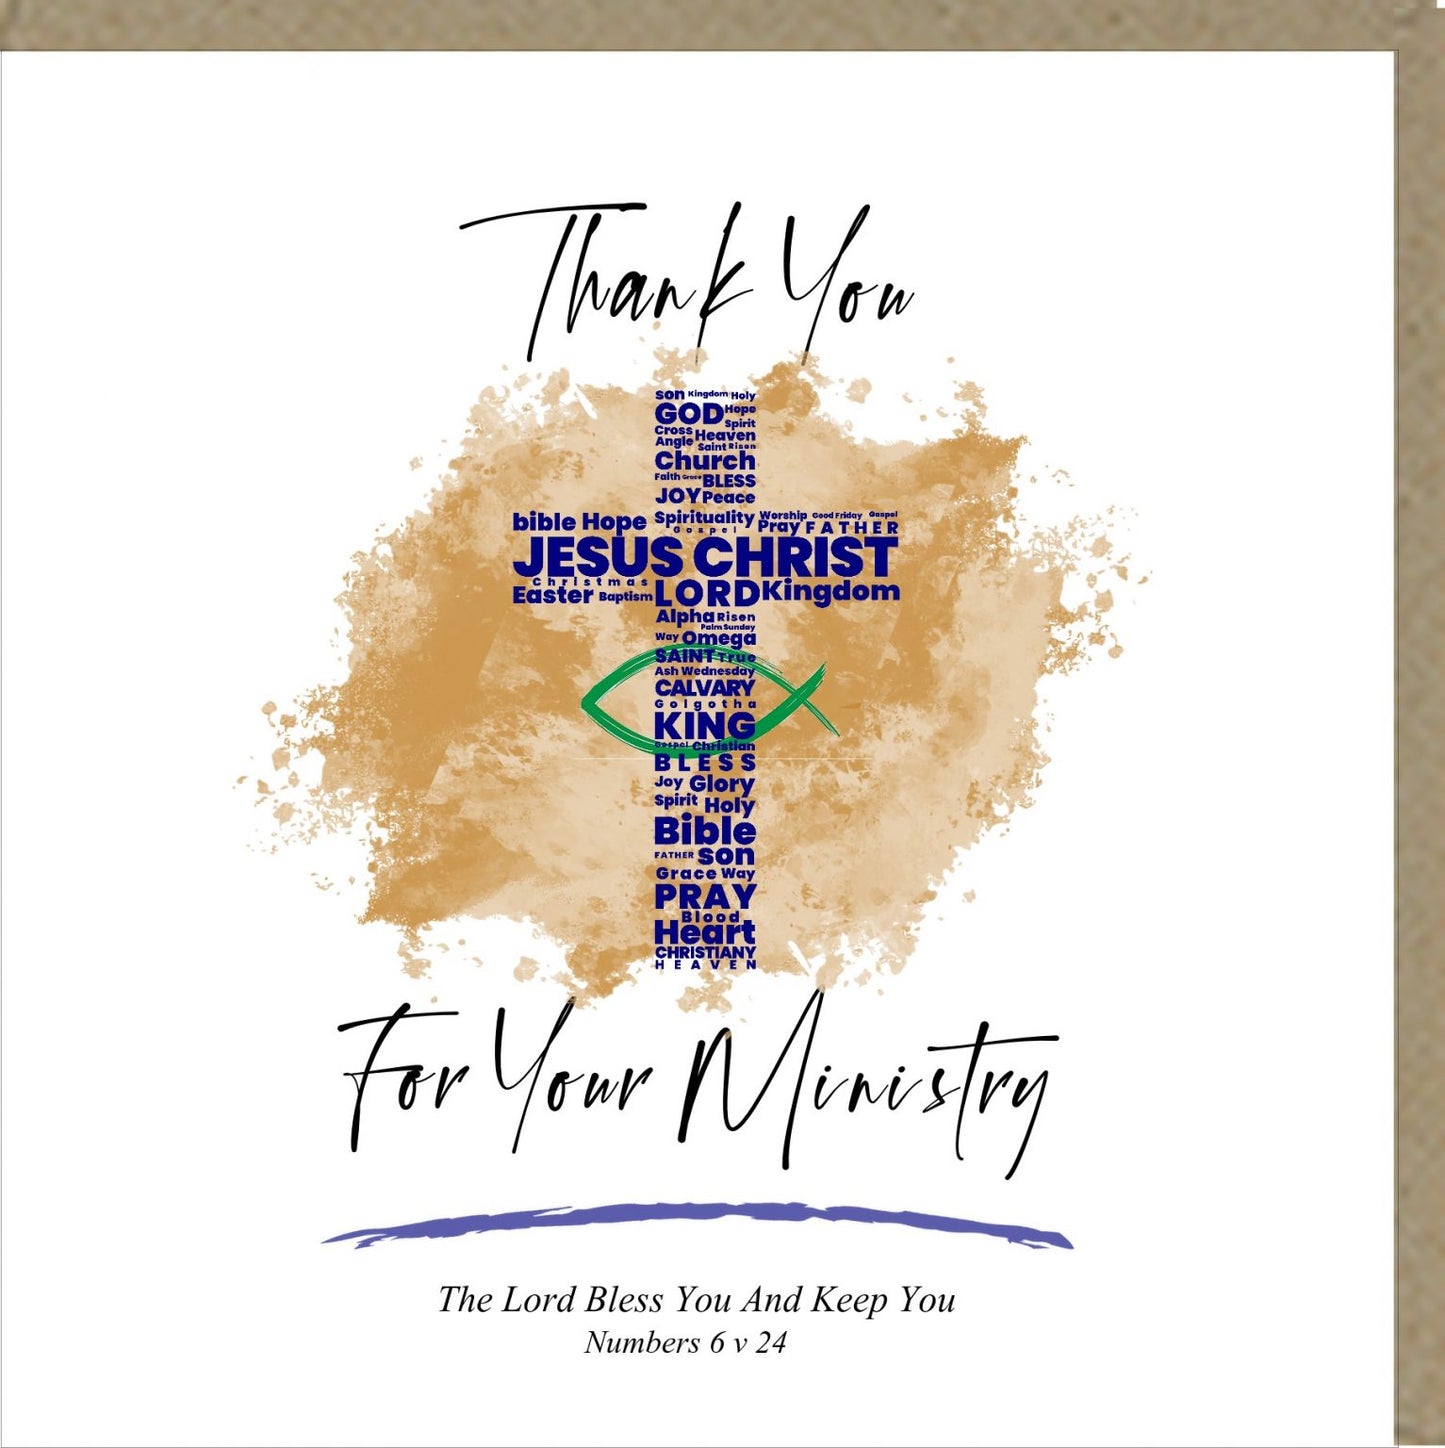 Thank You For Your Ministry Greetings Card - The Christian Gift Company